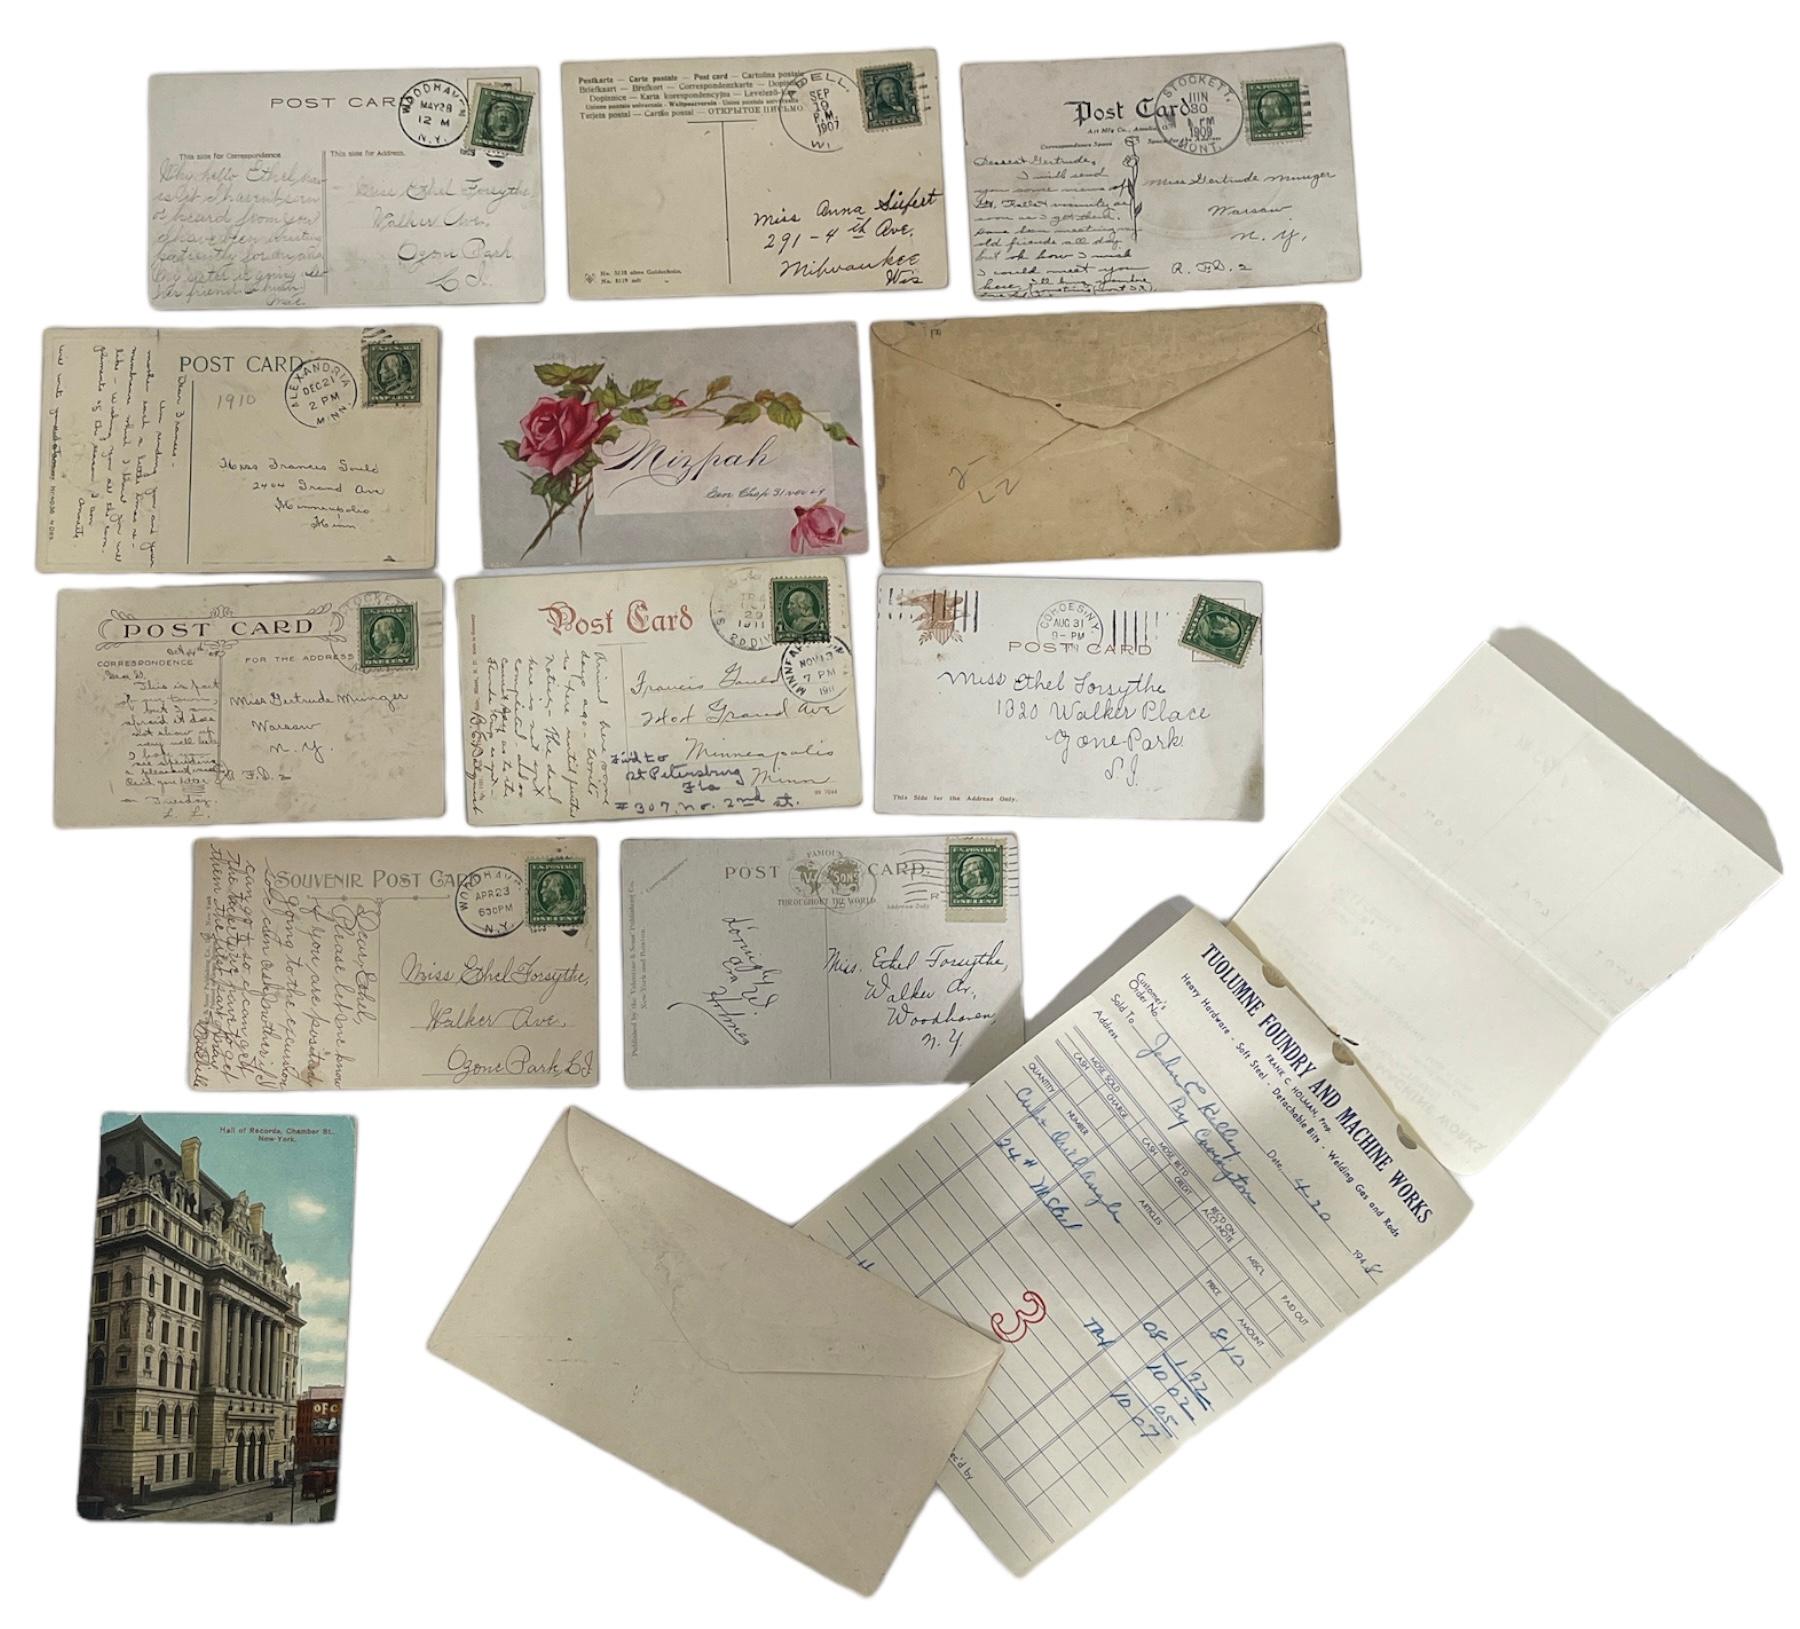 Vintage Post Cards with Stamps and Vintage Envelopes